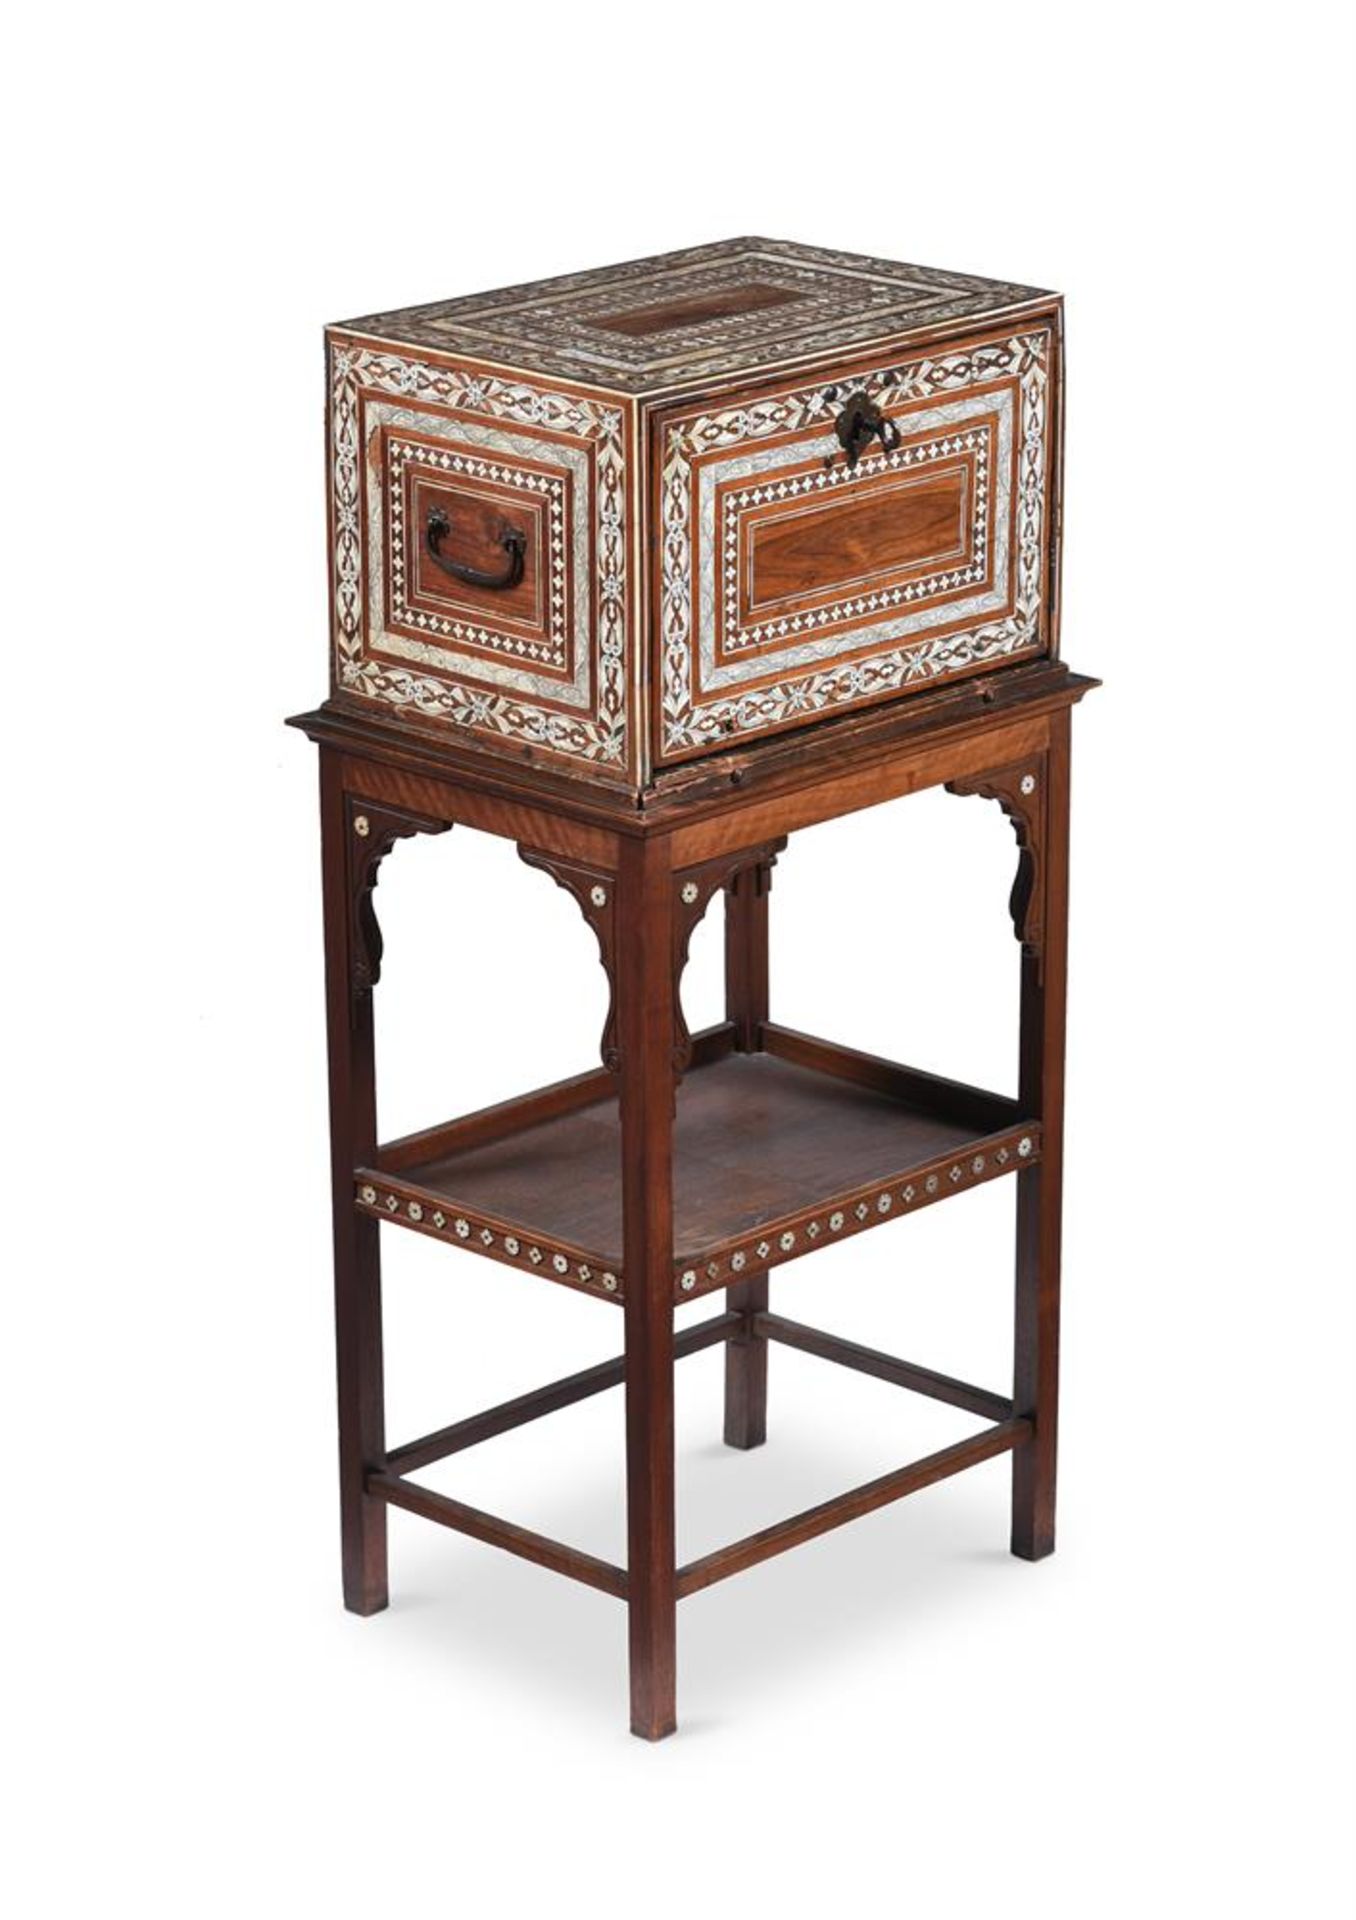 Y AN INDO-PORTUGUESE ROSEWOOD AND IVORY INLAID CABINET ON STAND, THE CABINET 17TH CENTURY